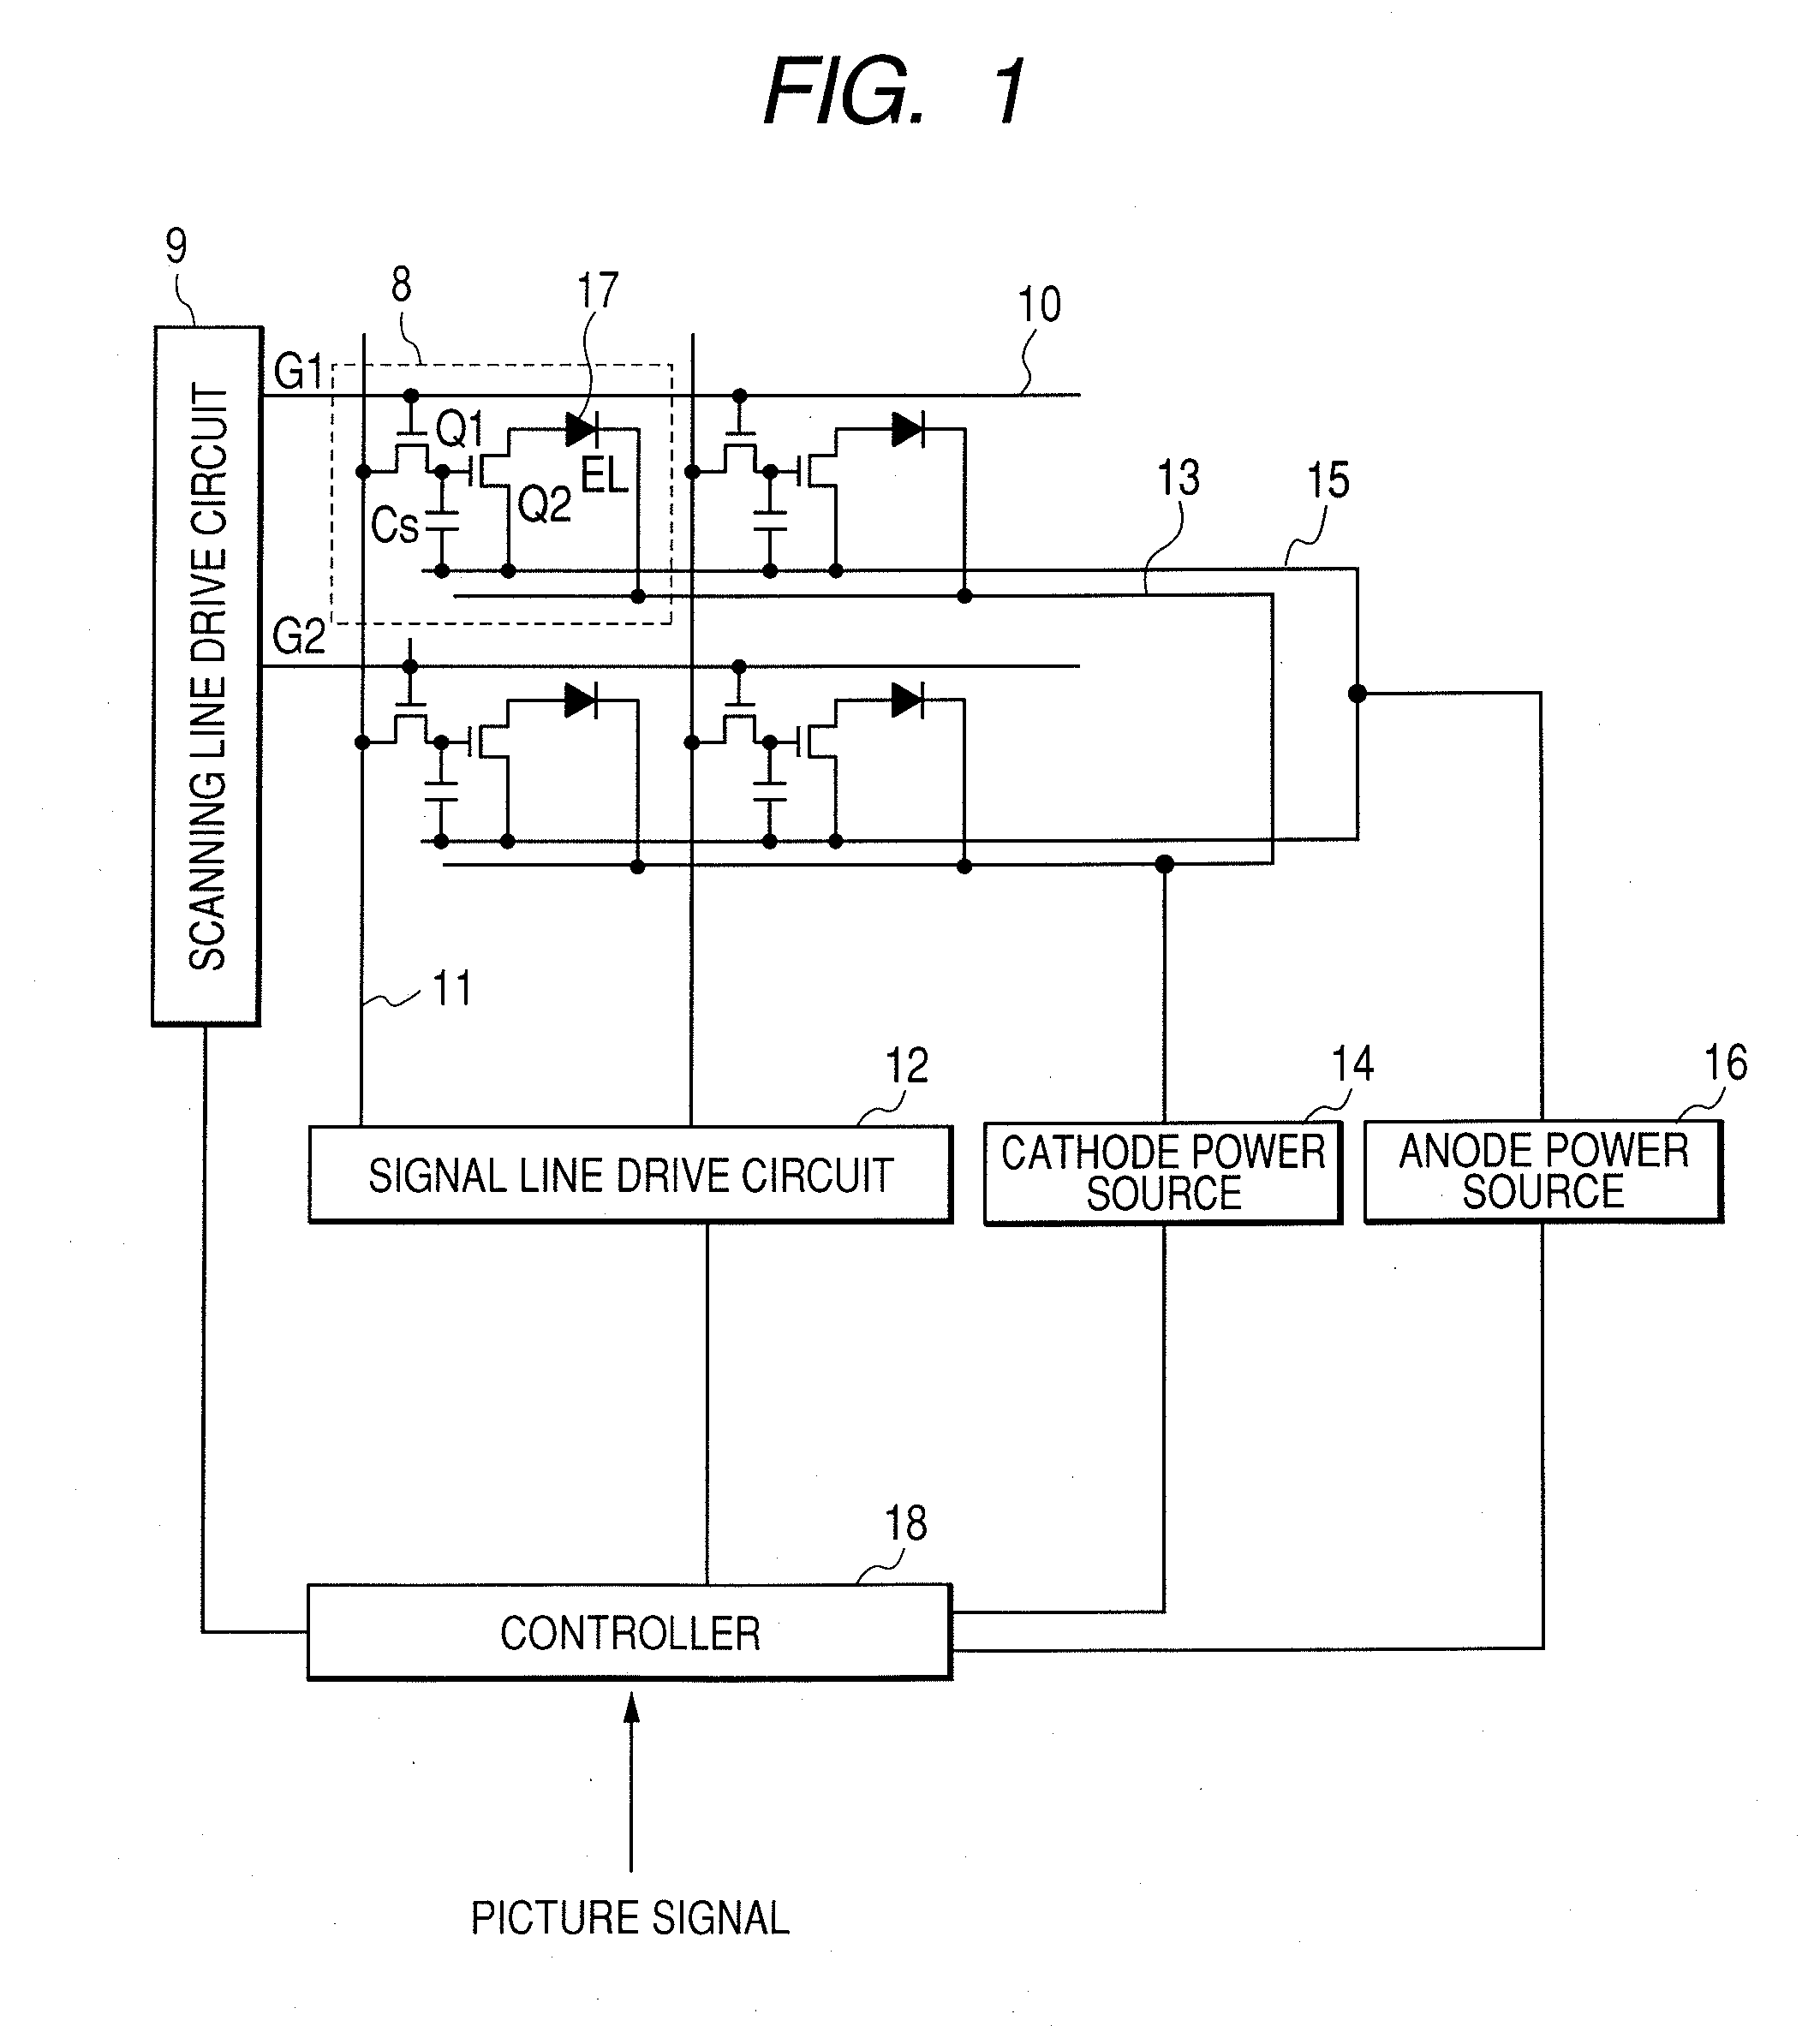 Organic elecroluminescence display apparatus, method of producing the same, and method of repairing a defect